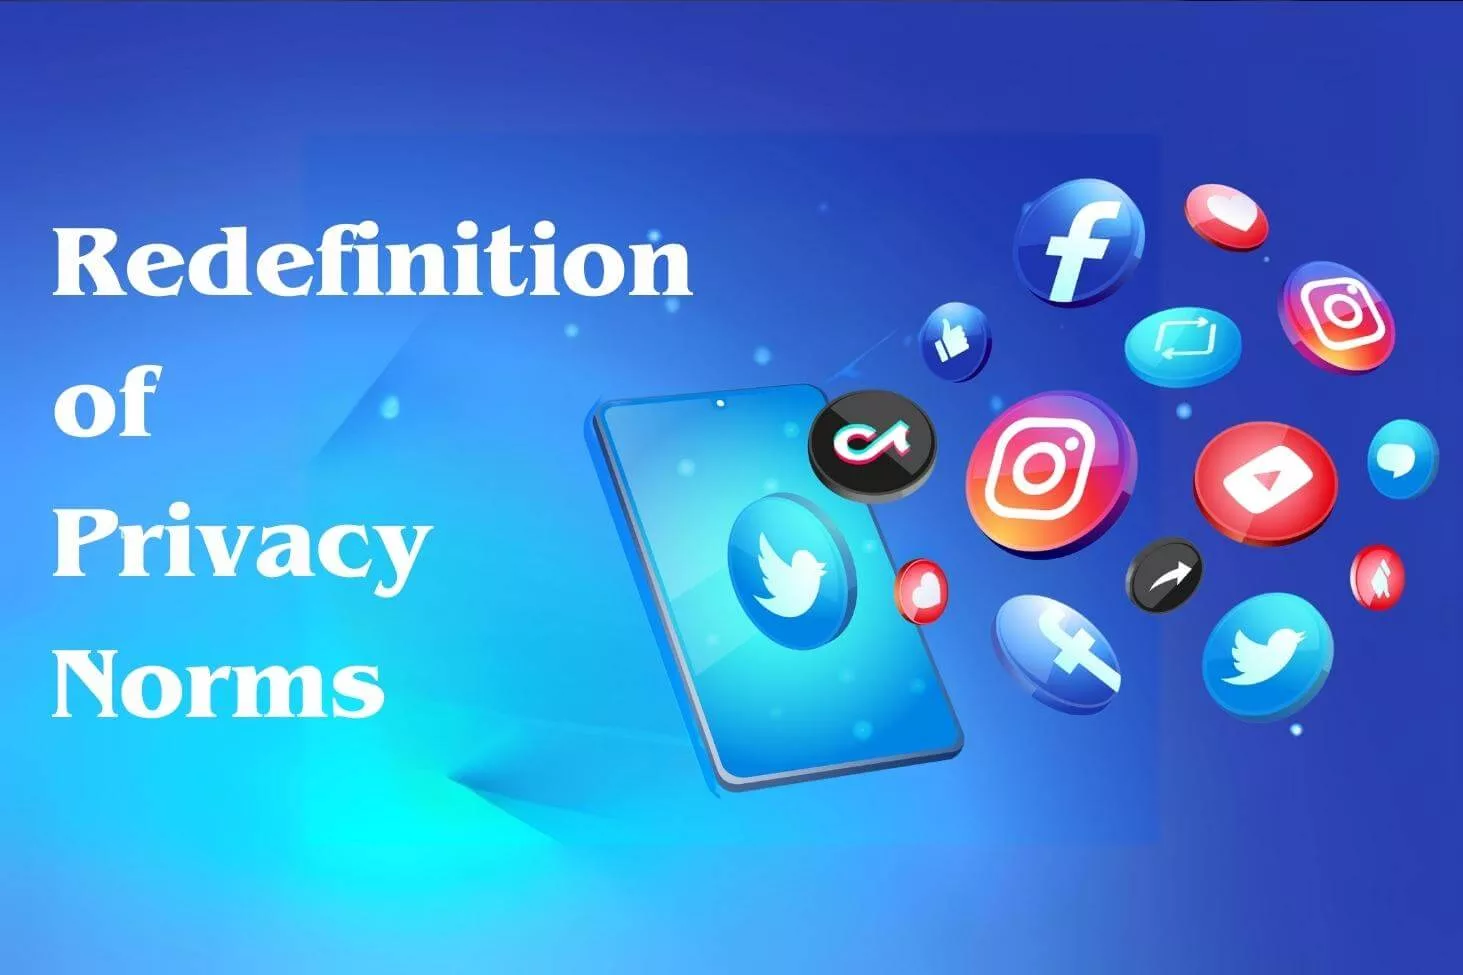 Redefinition of Privacy Norms